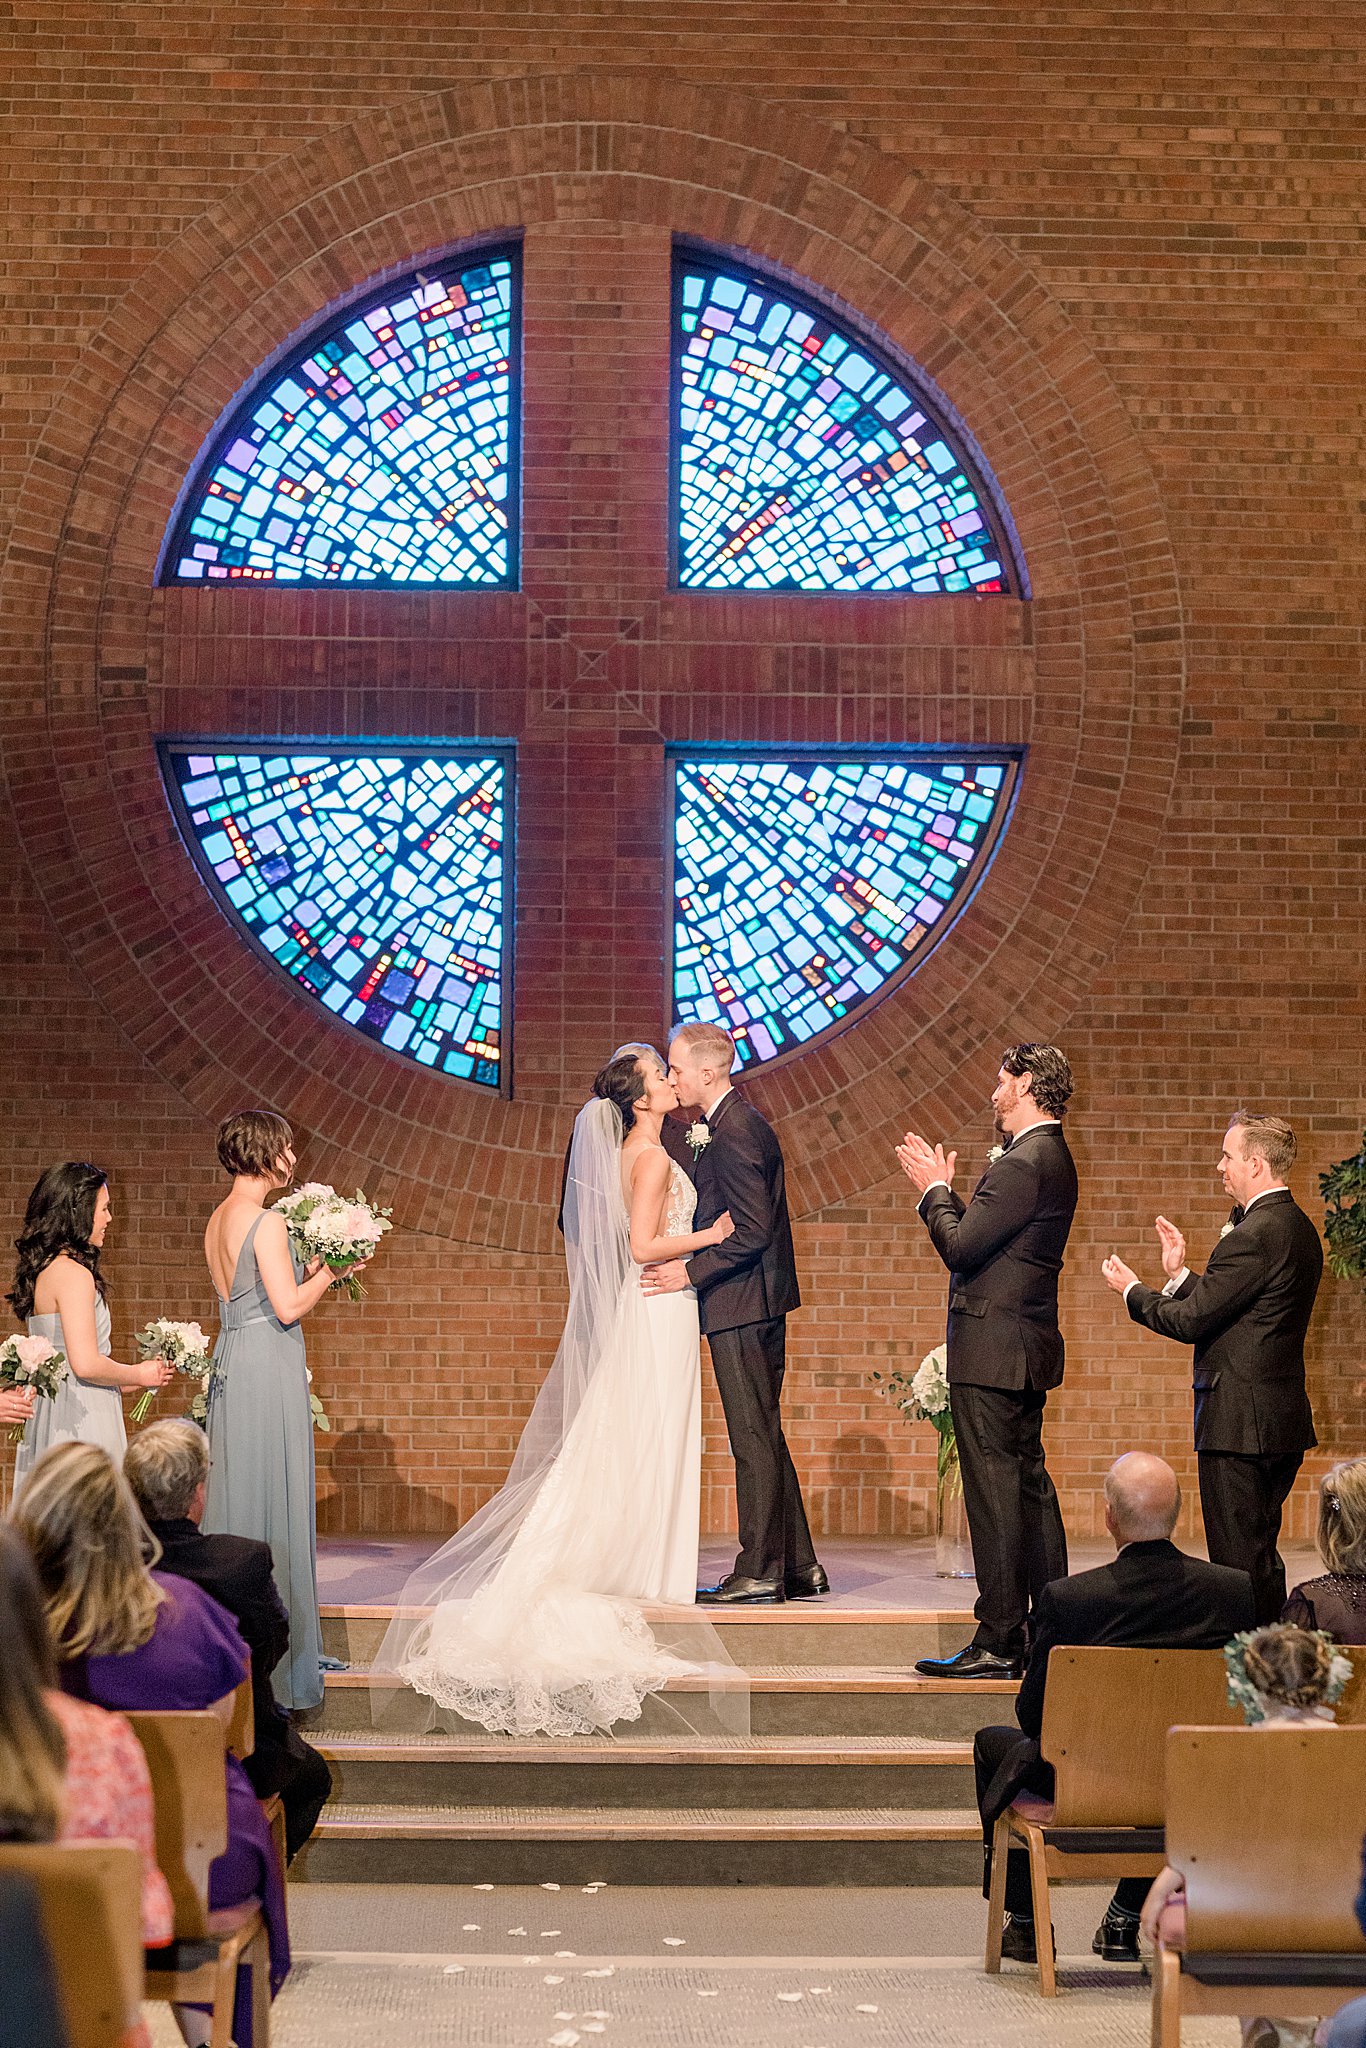 Bride and groom's first kiss at the church altar during elegant Grand Rapids wedding.